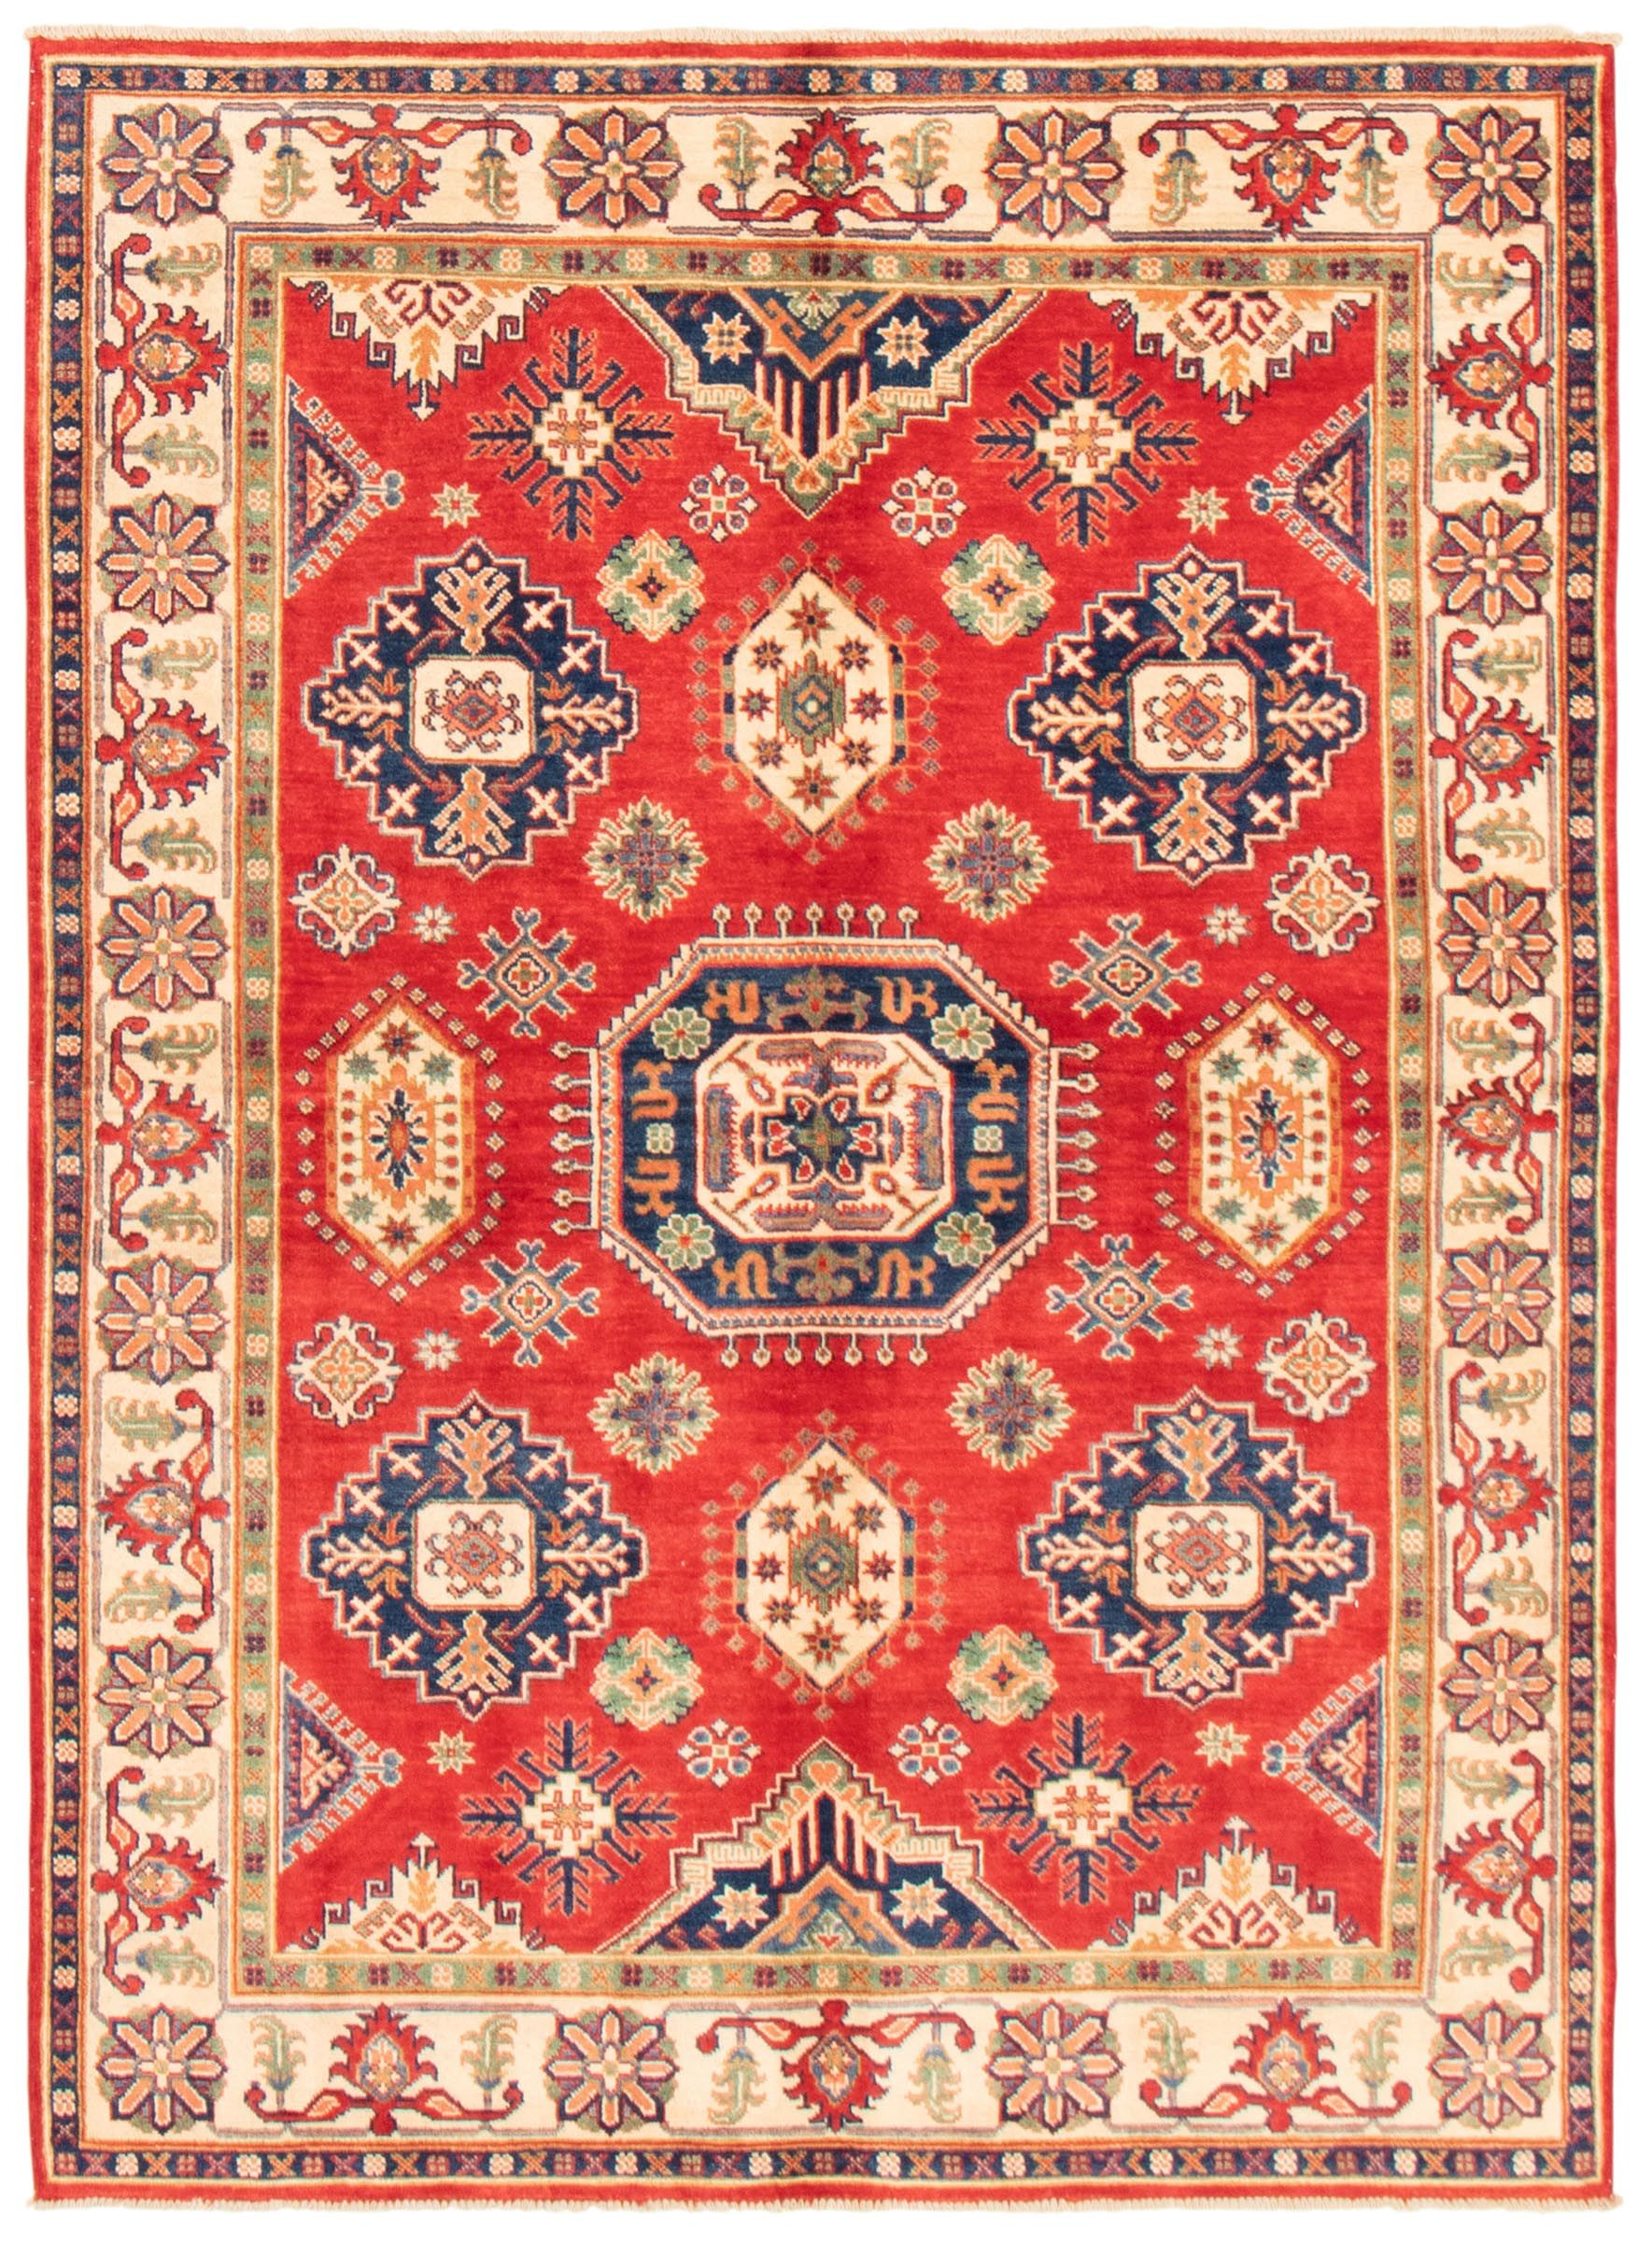 364409 Hand-Knotted Wool Rug Bedroom Finest Khal Mohammadi Bordered Red Rug 5'10 x 7'10 eCarpet Gallery Area Rug for Living Room 